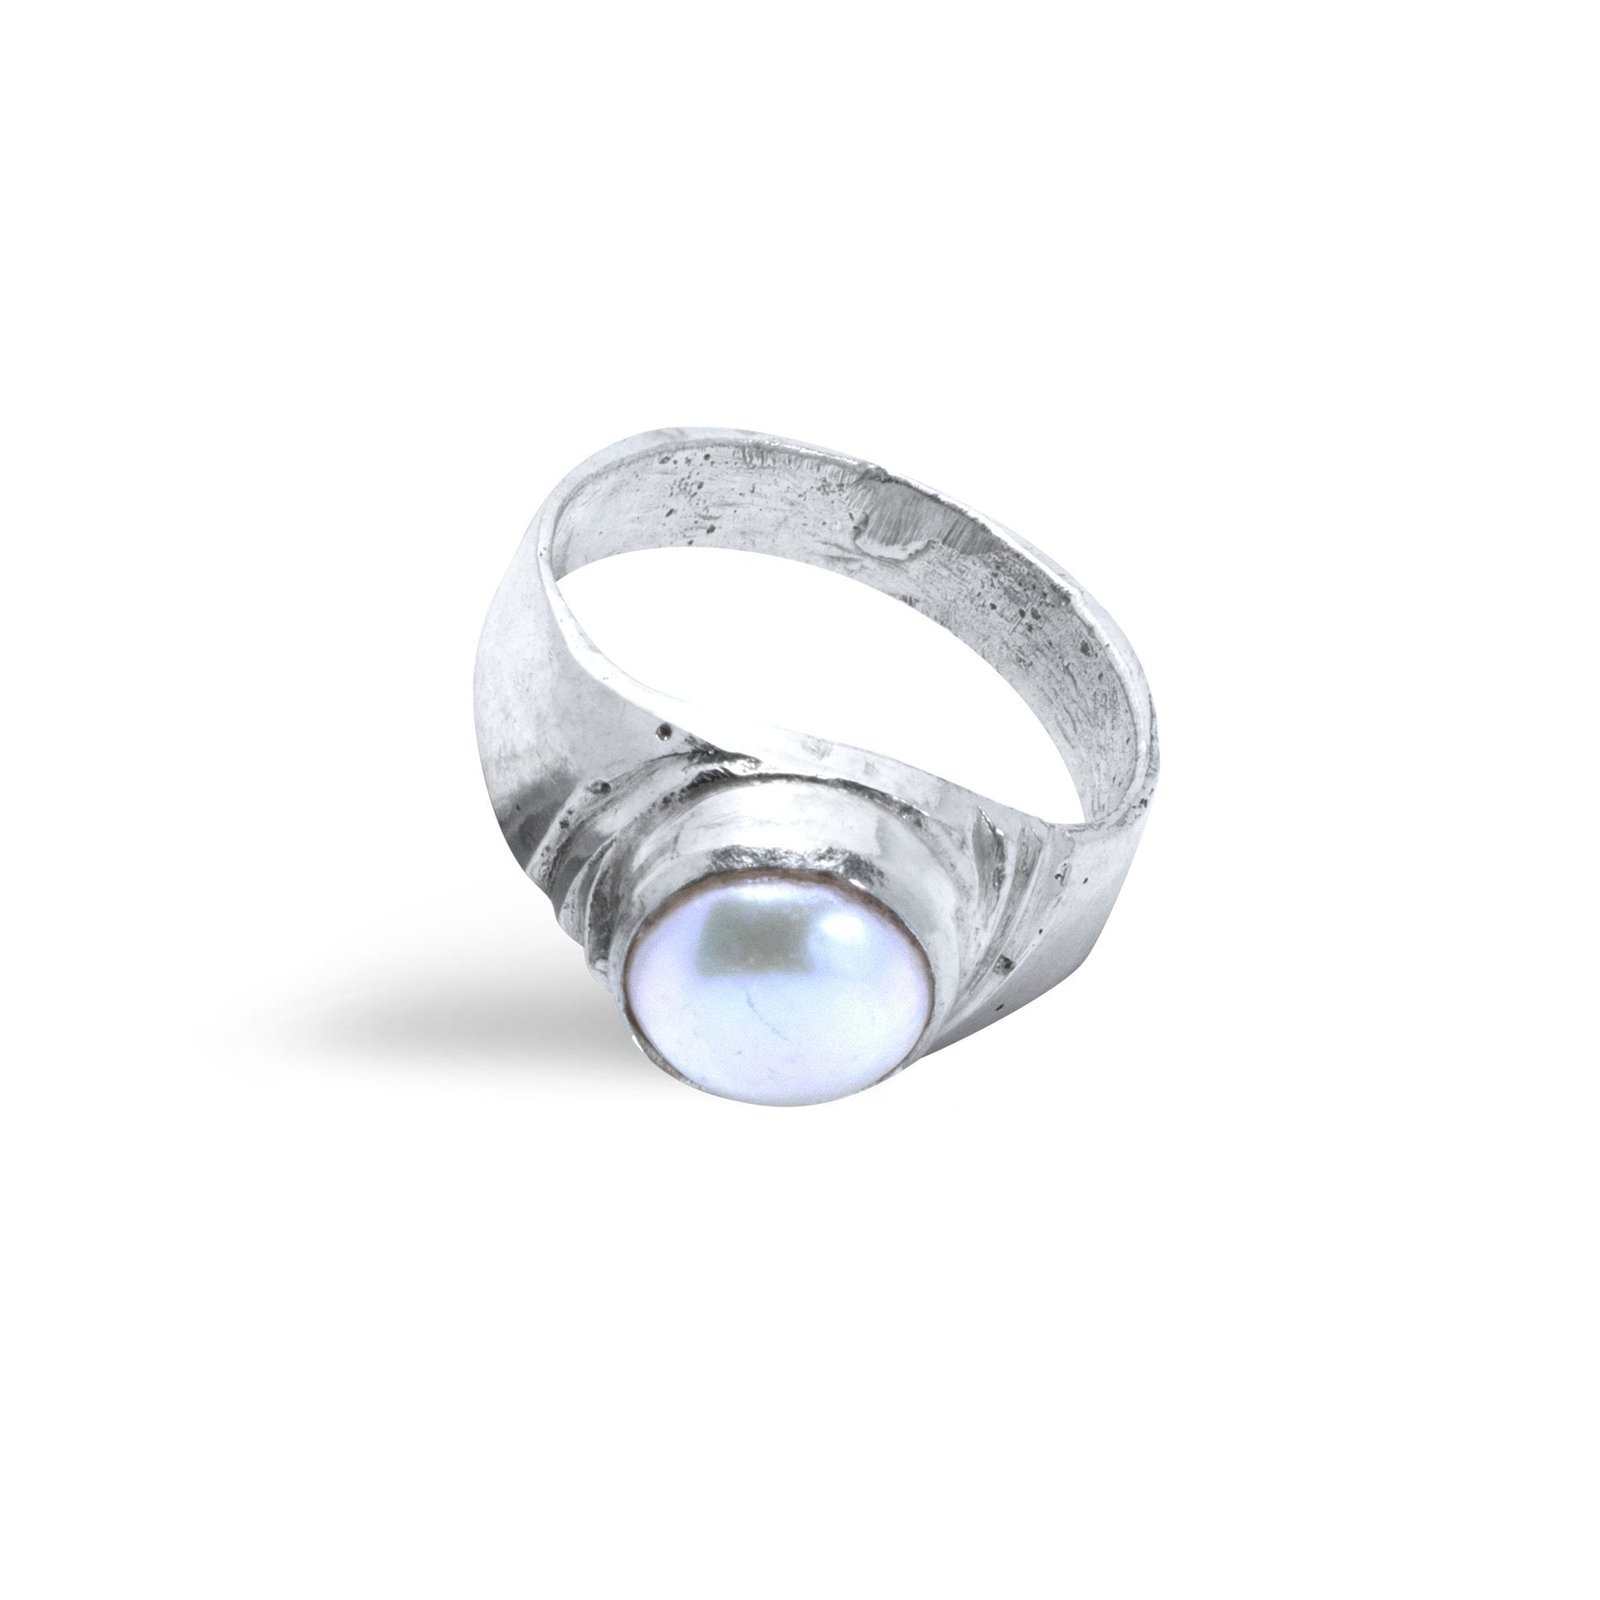 925 Sterling Silver Handmade Jewelry Pearl Gemstone Ring, Rings for Women,  Gift for Her - Etsy